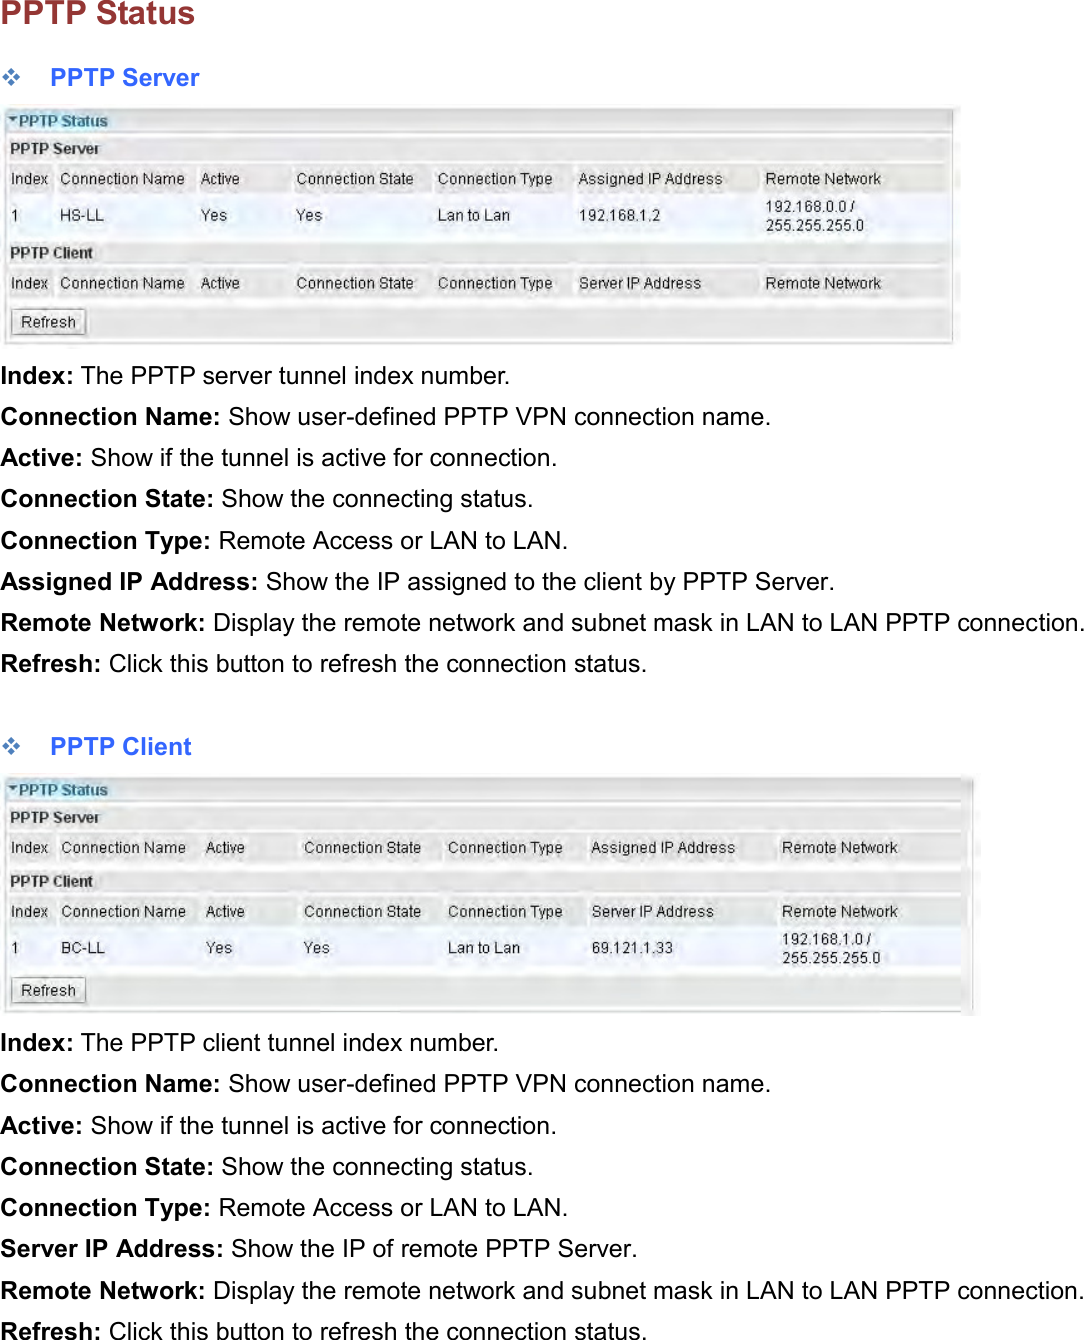    PPTP Status  PPTP Server  Index: The PPTP server tunnel index number. Connection Name: Show user-defined PPTP VPN connection name. Active: Show if the tunnel is active for connection. Connection State: Show the connecting status. Connection Type: Remote Access or LAN to LAN. Assigned IP Address: Show the IP assigned to the client by PPTP Server. Remote Network: Display the remote network and subnet mask in LAN to LAN PPTP connection. Refresh: Click this button to refresh the connection status.   PPTP Client  Index: The PPTP client tunnel index number. Connection Name: Show user-defined PPTP VPN connection name. Active: Show if the tunnel is active for connection. Connection State: Show the connecting status. Connection Type: Remote Access or LAN to LAN. Server IP Address: Show the IP of remote PPTP Server. Remote Network: Display the remote network and subnet mask in LAN to LAN PPTP connection. Refresh: Click this button to refresh the connection status.  